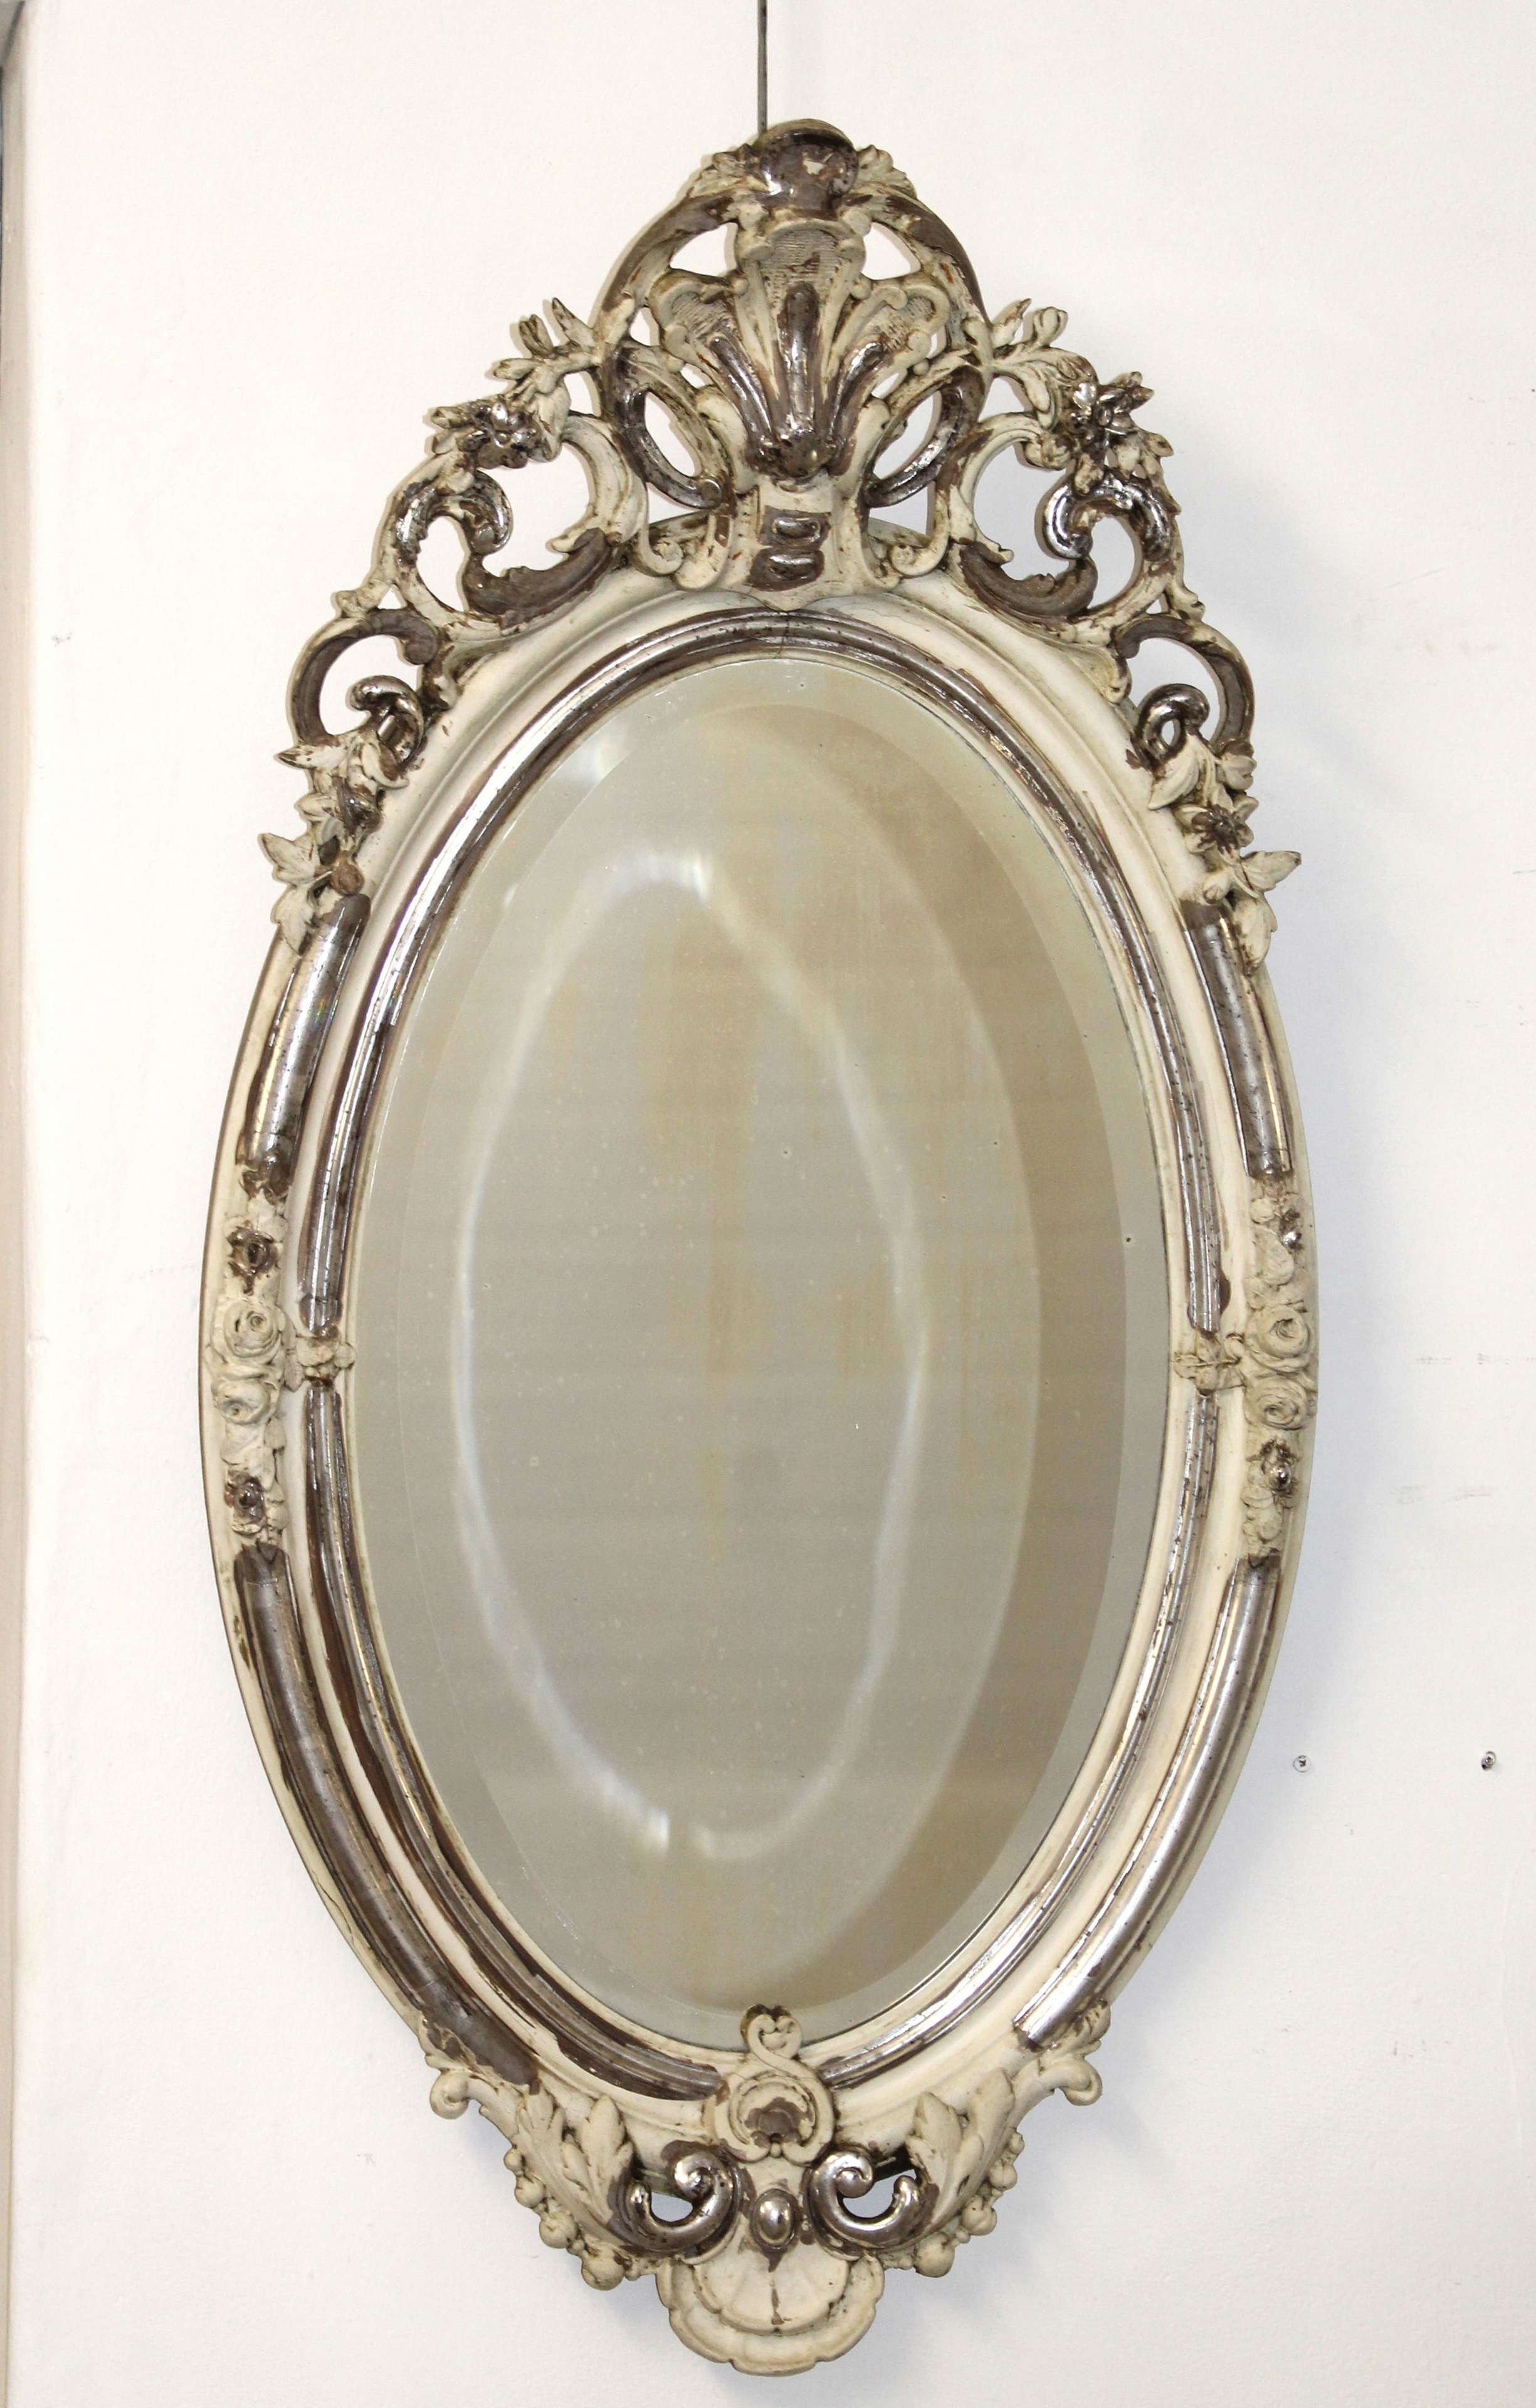 Antique Silver Mirror: A Reflection Of Timeless Elegance